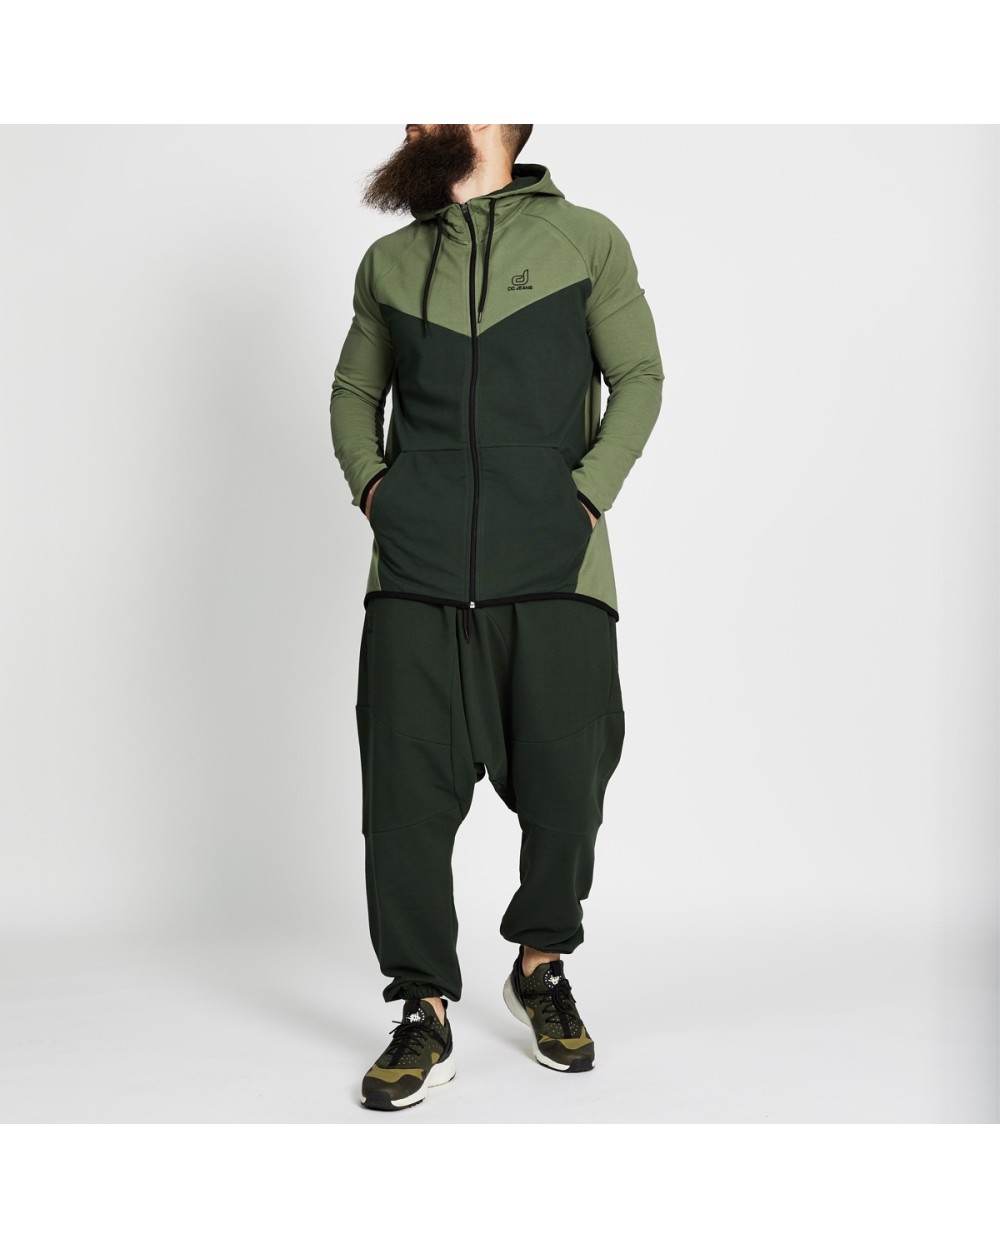 Two-tone tracksuit 2018 DC Jeans